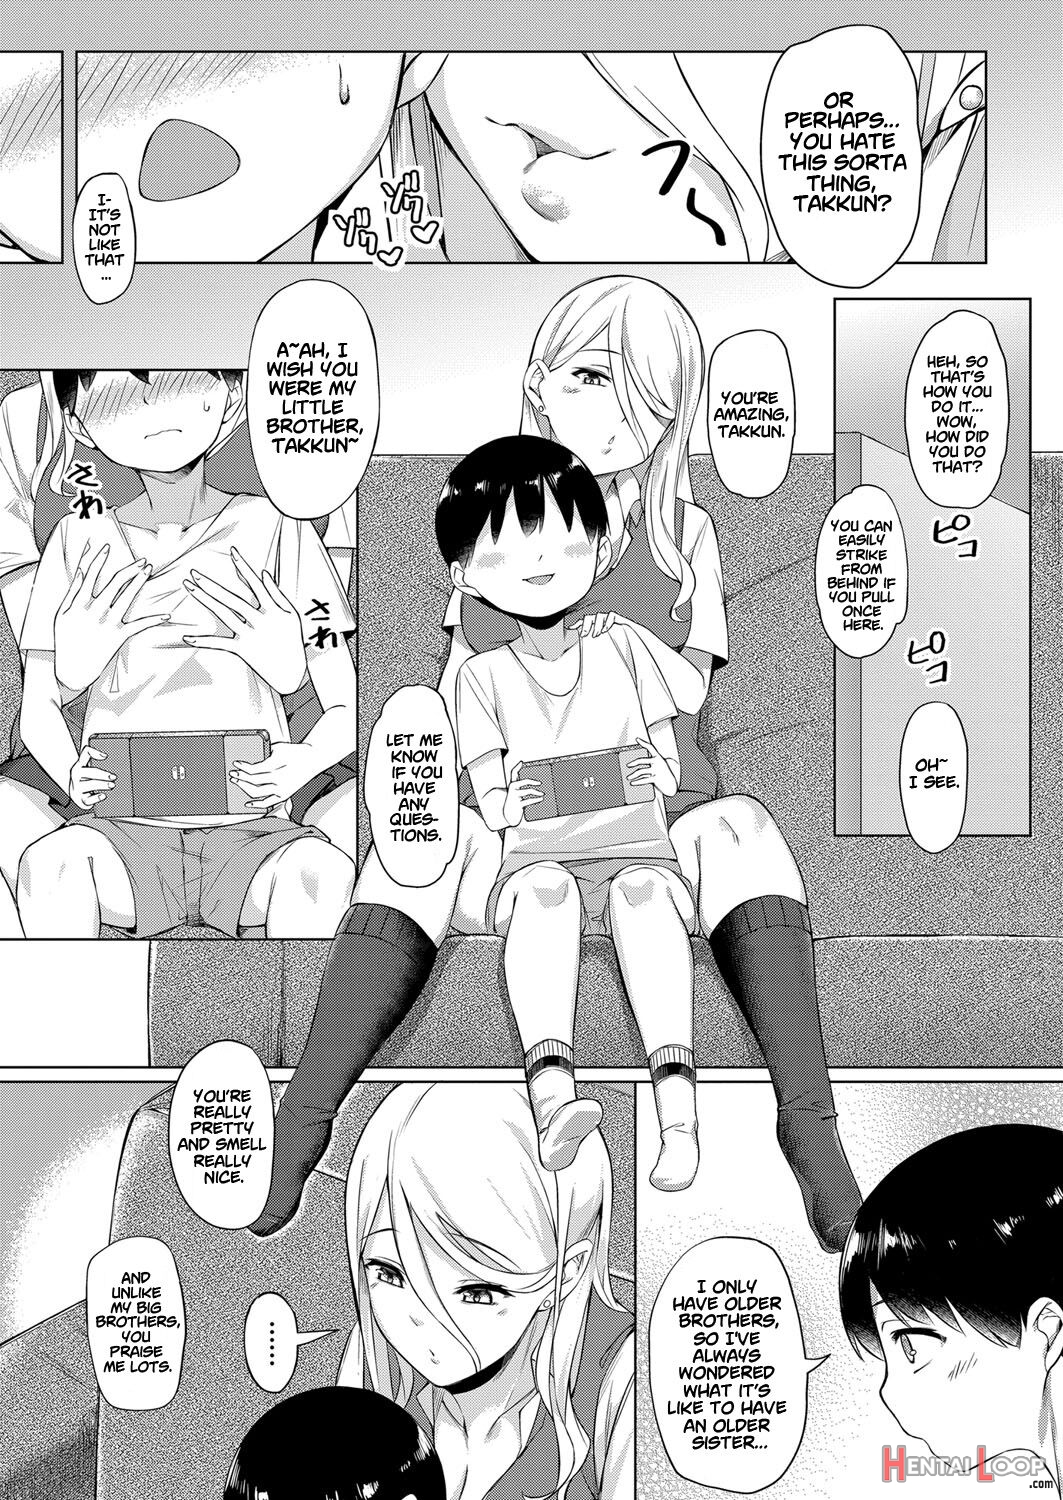 The Day Shotakun Knew The Gal page 5